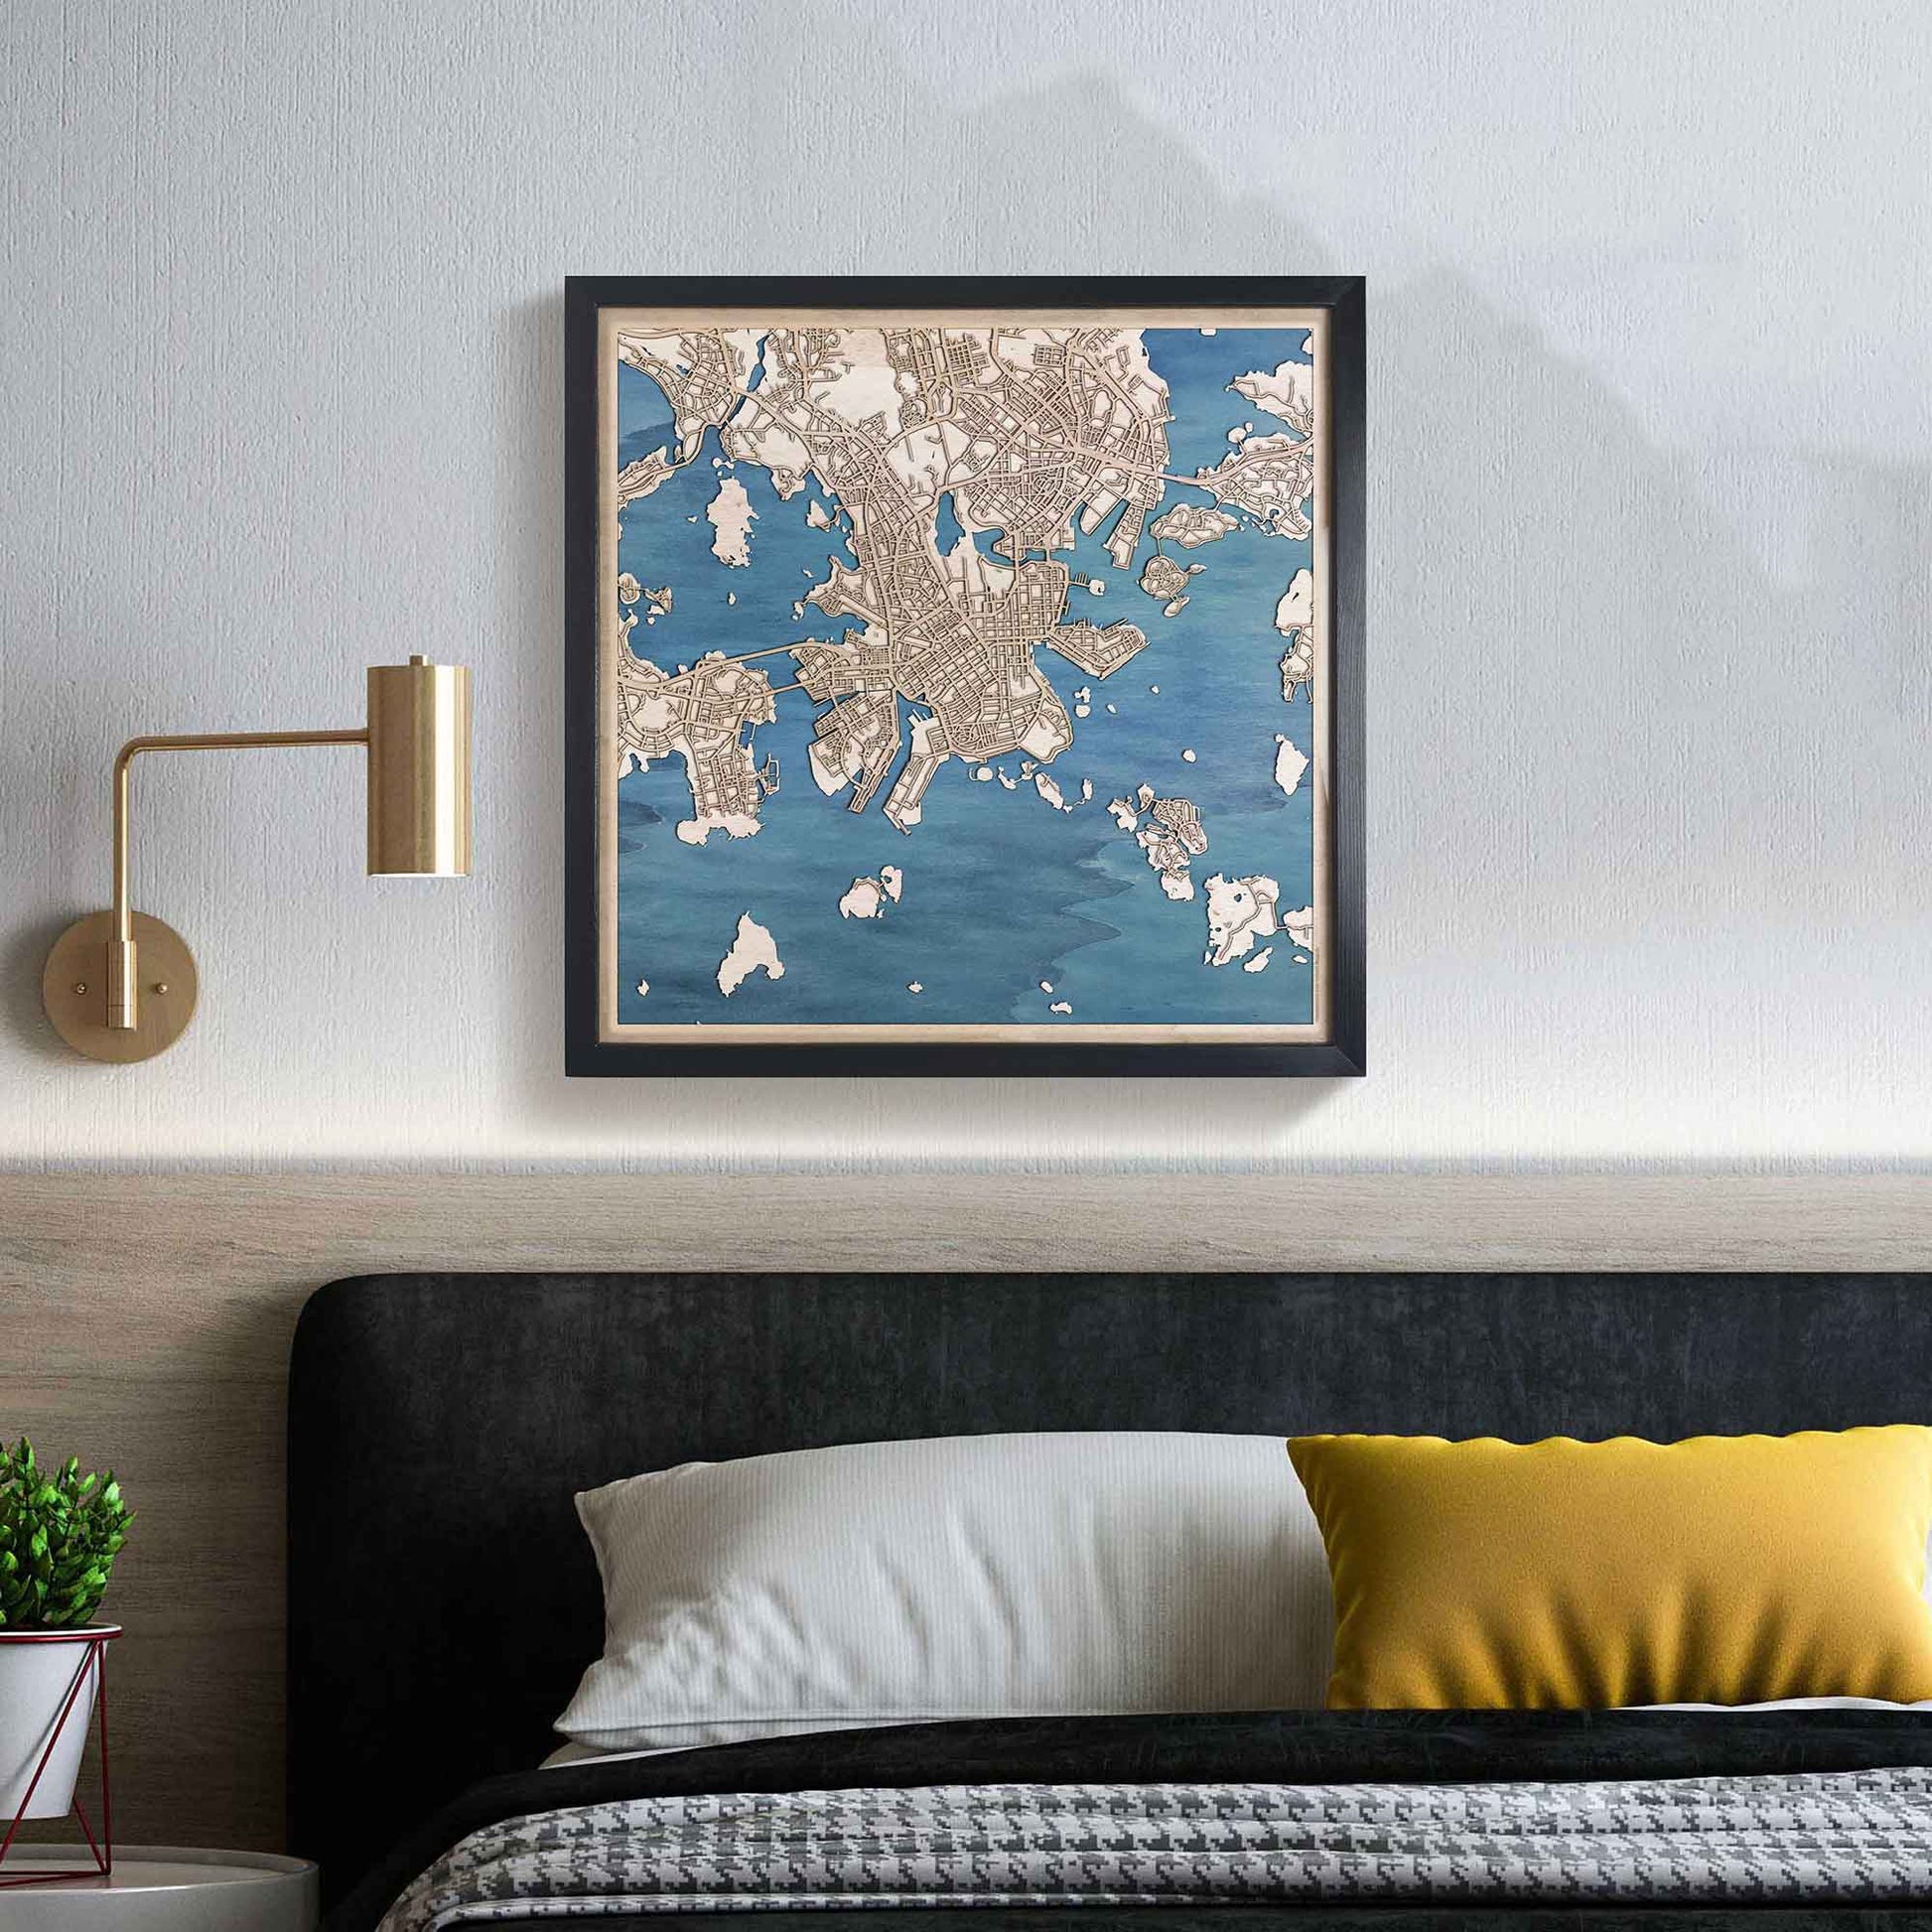 Helsinki Wooden Map by CityWood - Custom Wood Map Art - Unique Laser Cut Engraved - Anniversary Gift